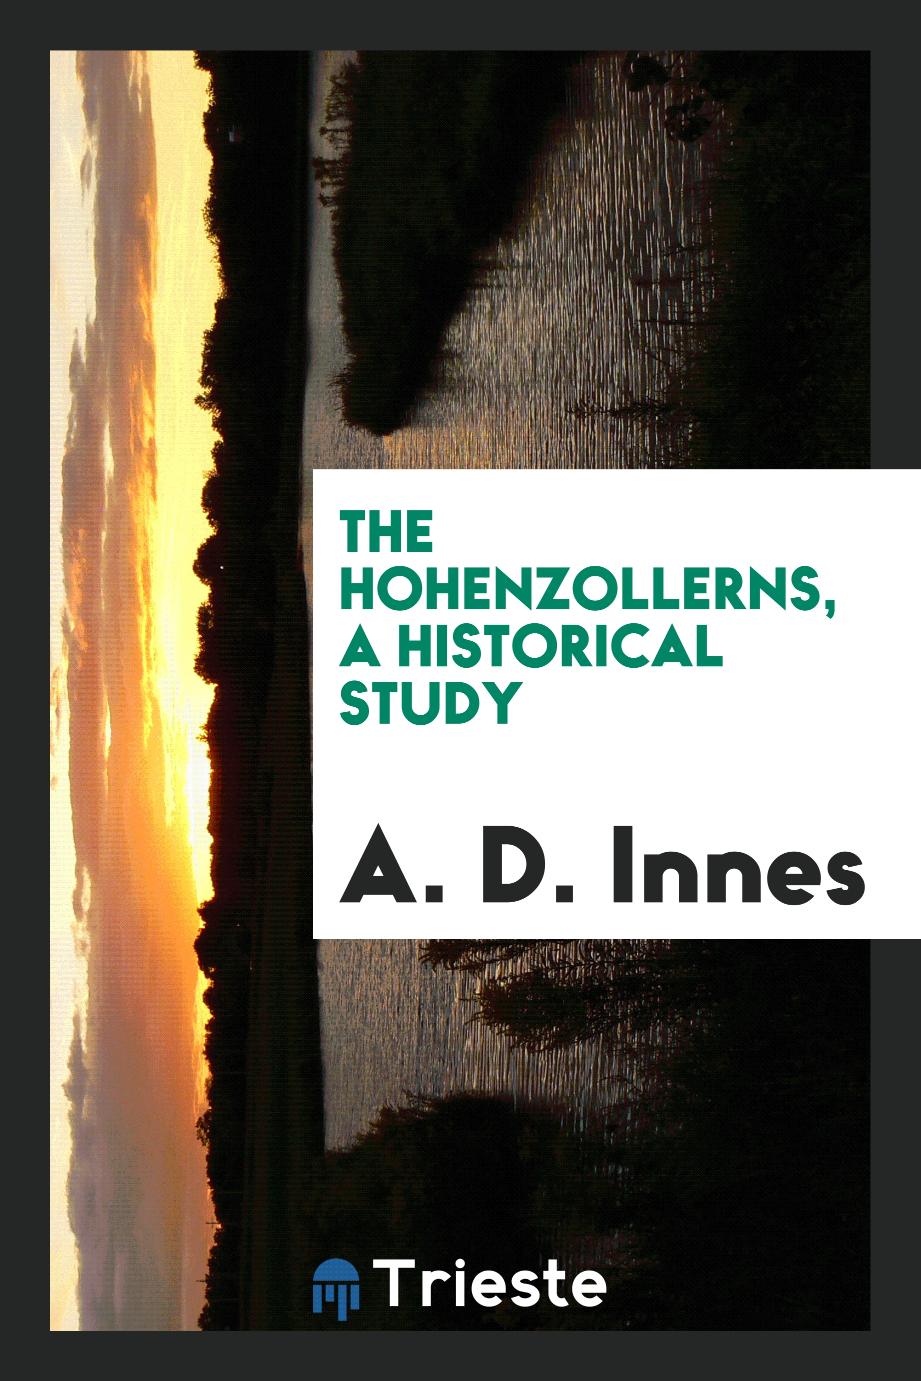 The Hohenzollerns, a historical study